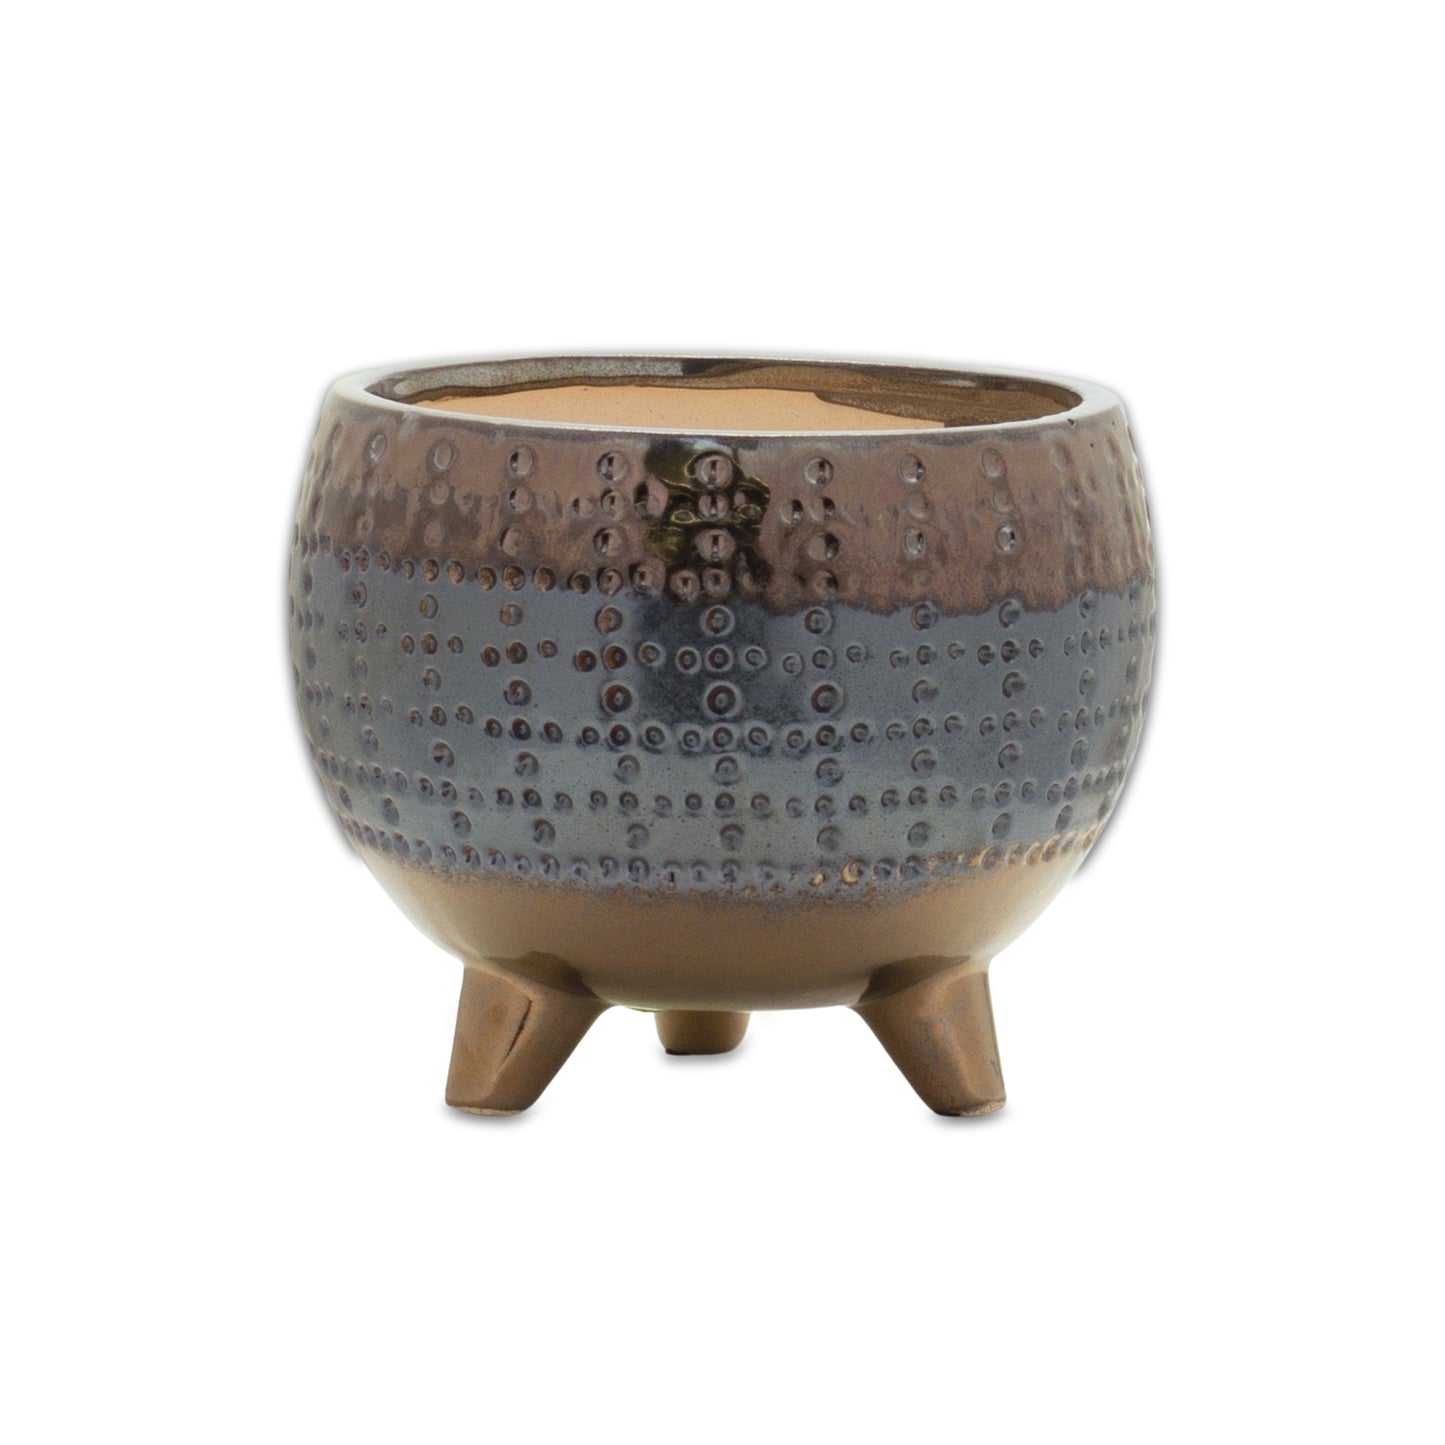 Dotted Ceramic Planter with Pewter Accent 5.25"H